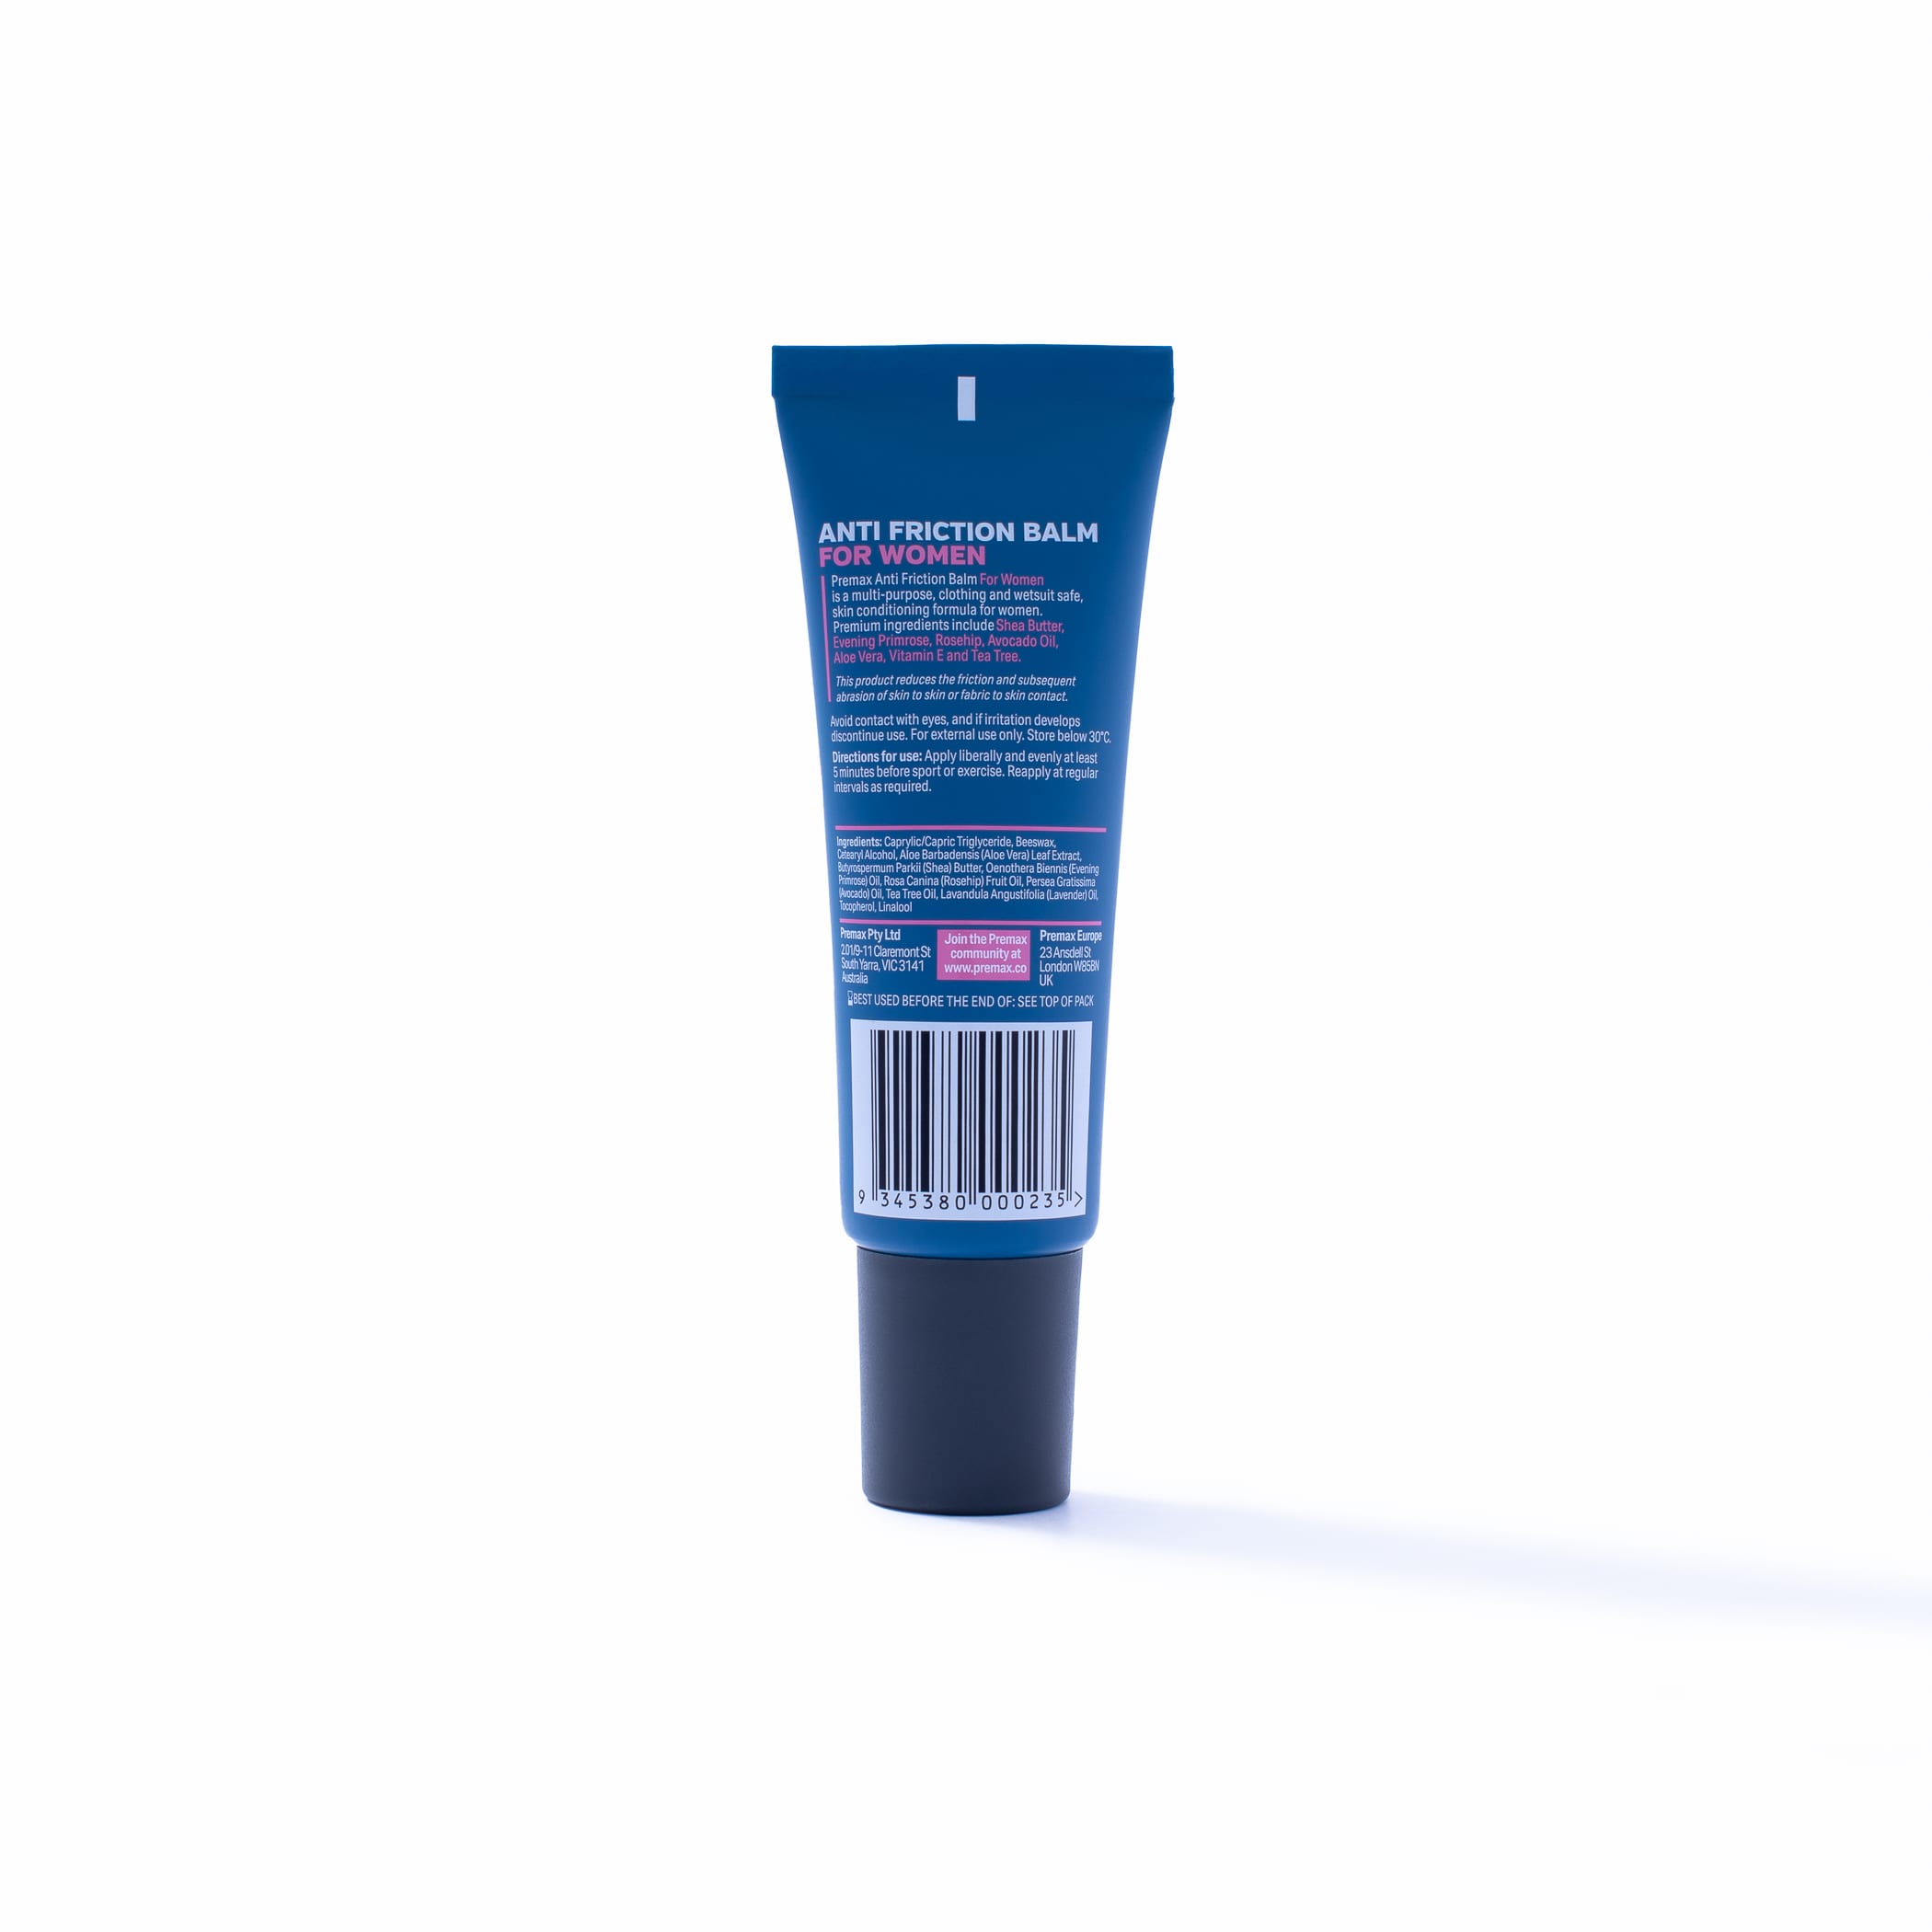 Anti Friction Balm for Women (50g) - back